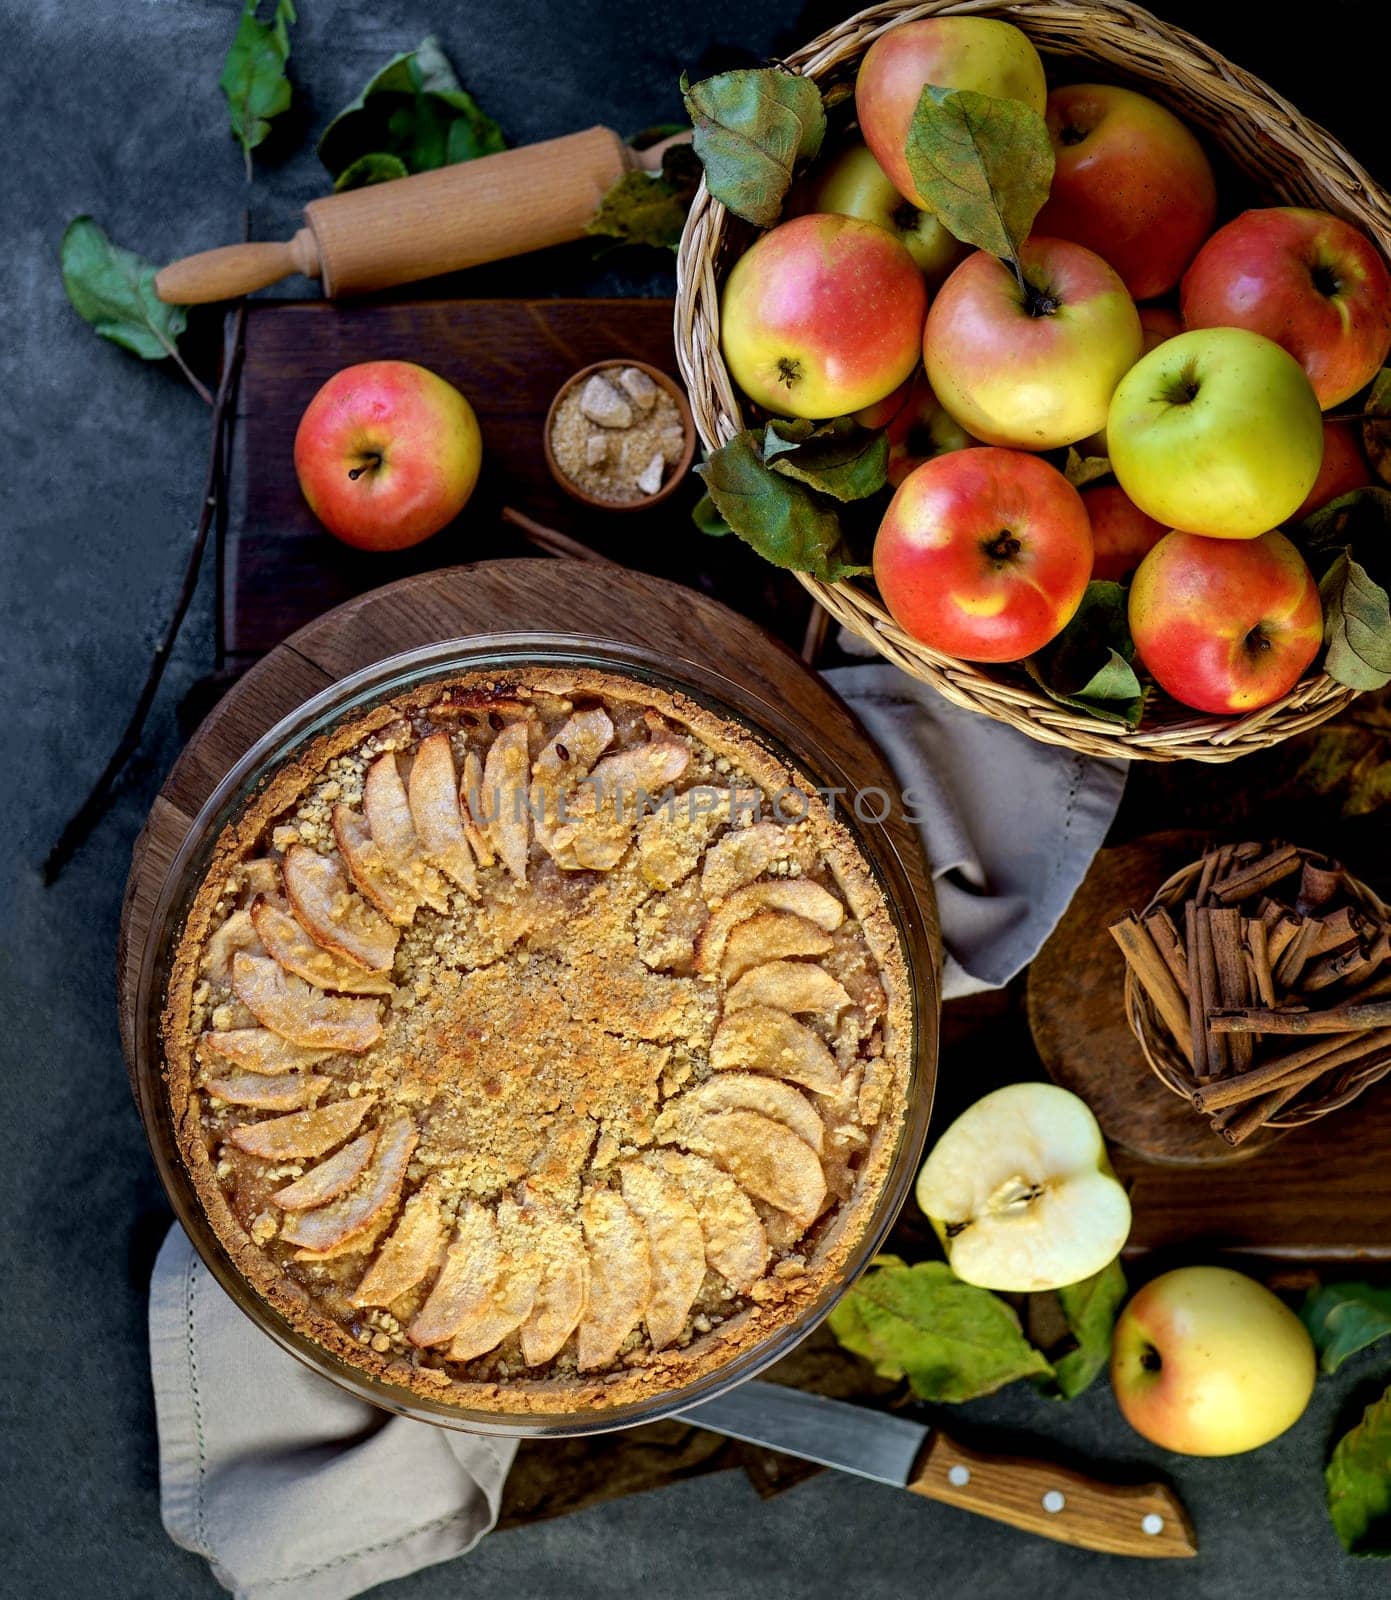 Apples and cinnamon are used in baking. Homemade apple pie on dark rustic background, top view. Classic autumn dessert by aprilphoto